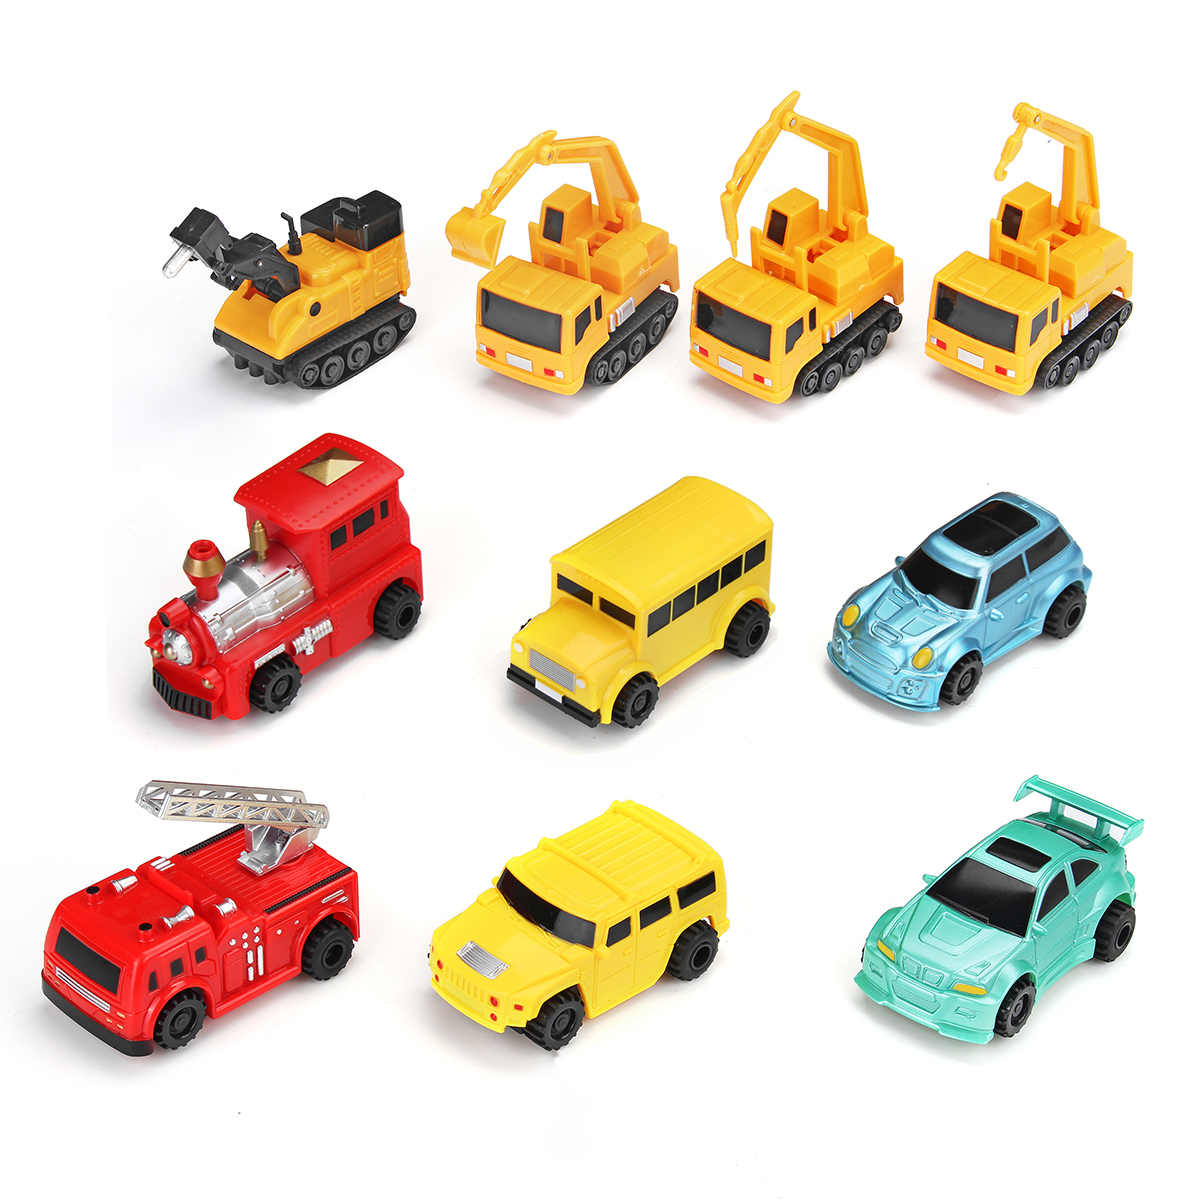 Scribing-Induction-Car-Creative-Follow-Any-Drawn-Line-Pen-Inductive-Cute-Diecast-Model-for-Children--1621624-4